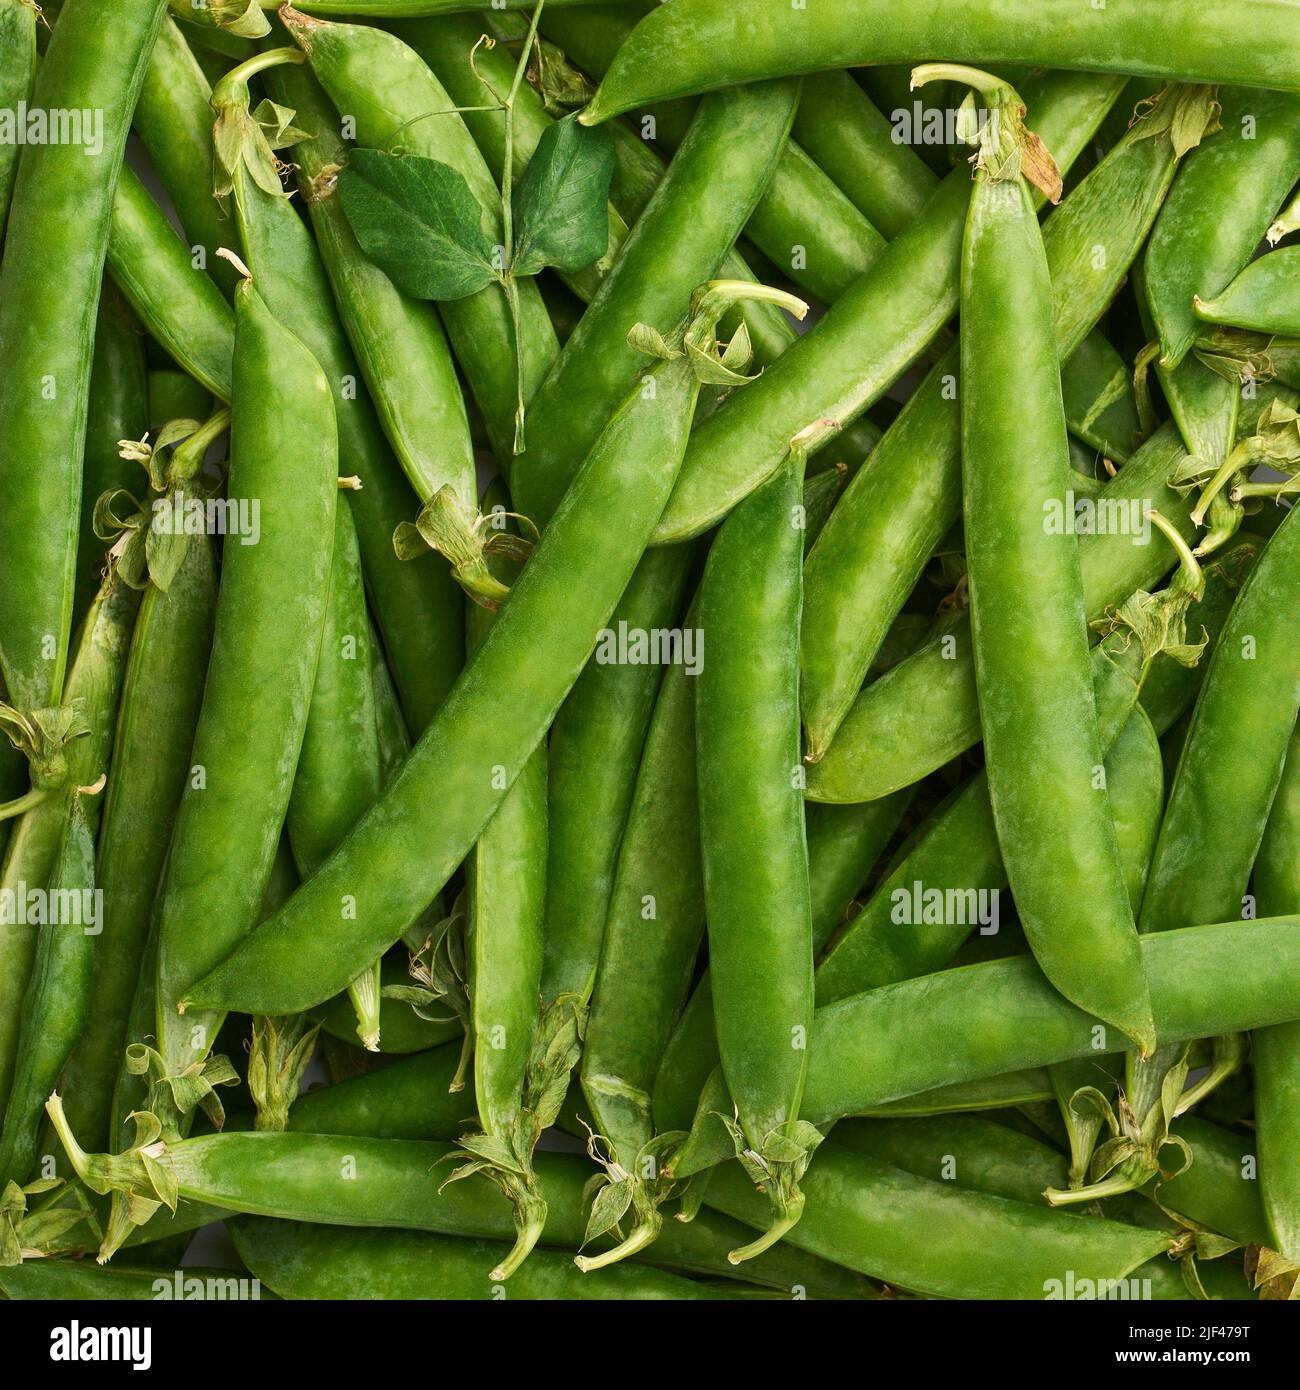 Green pea pods background, vegan raw food, organic farm products, close up Stock Photo